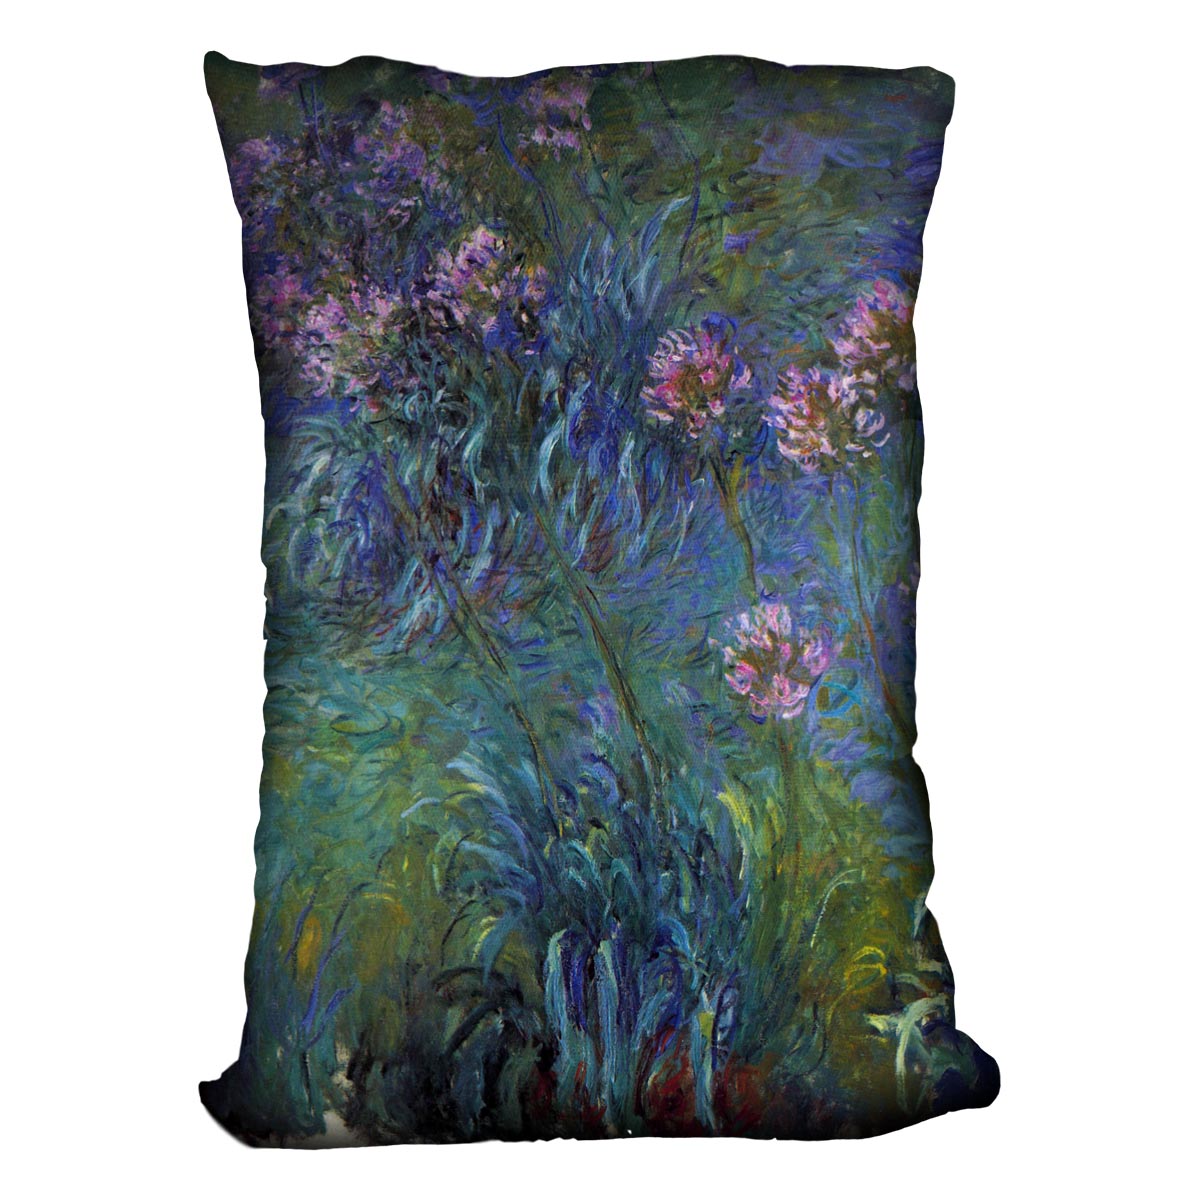 Jewelry lilies by Monet Cushion